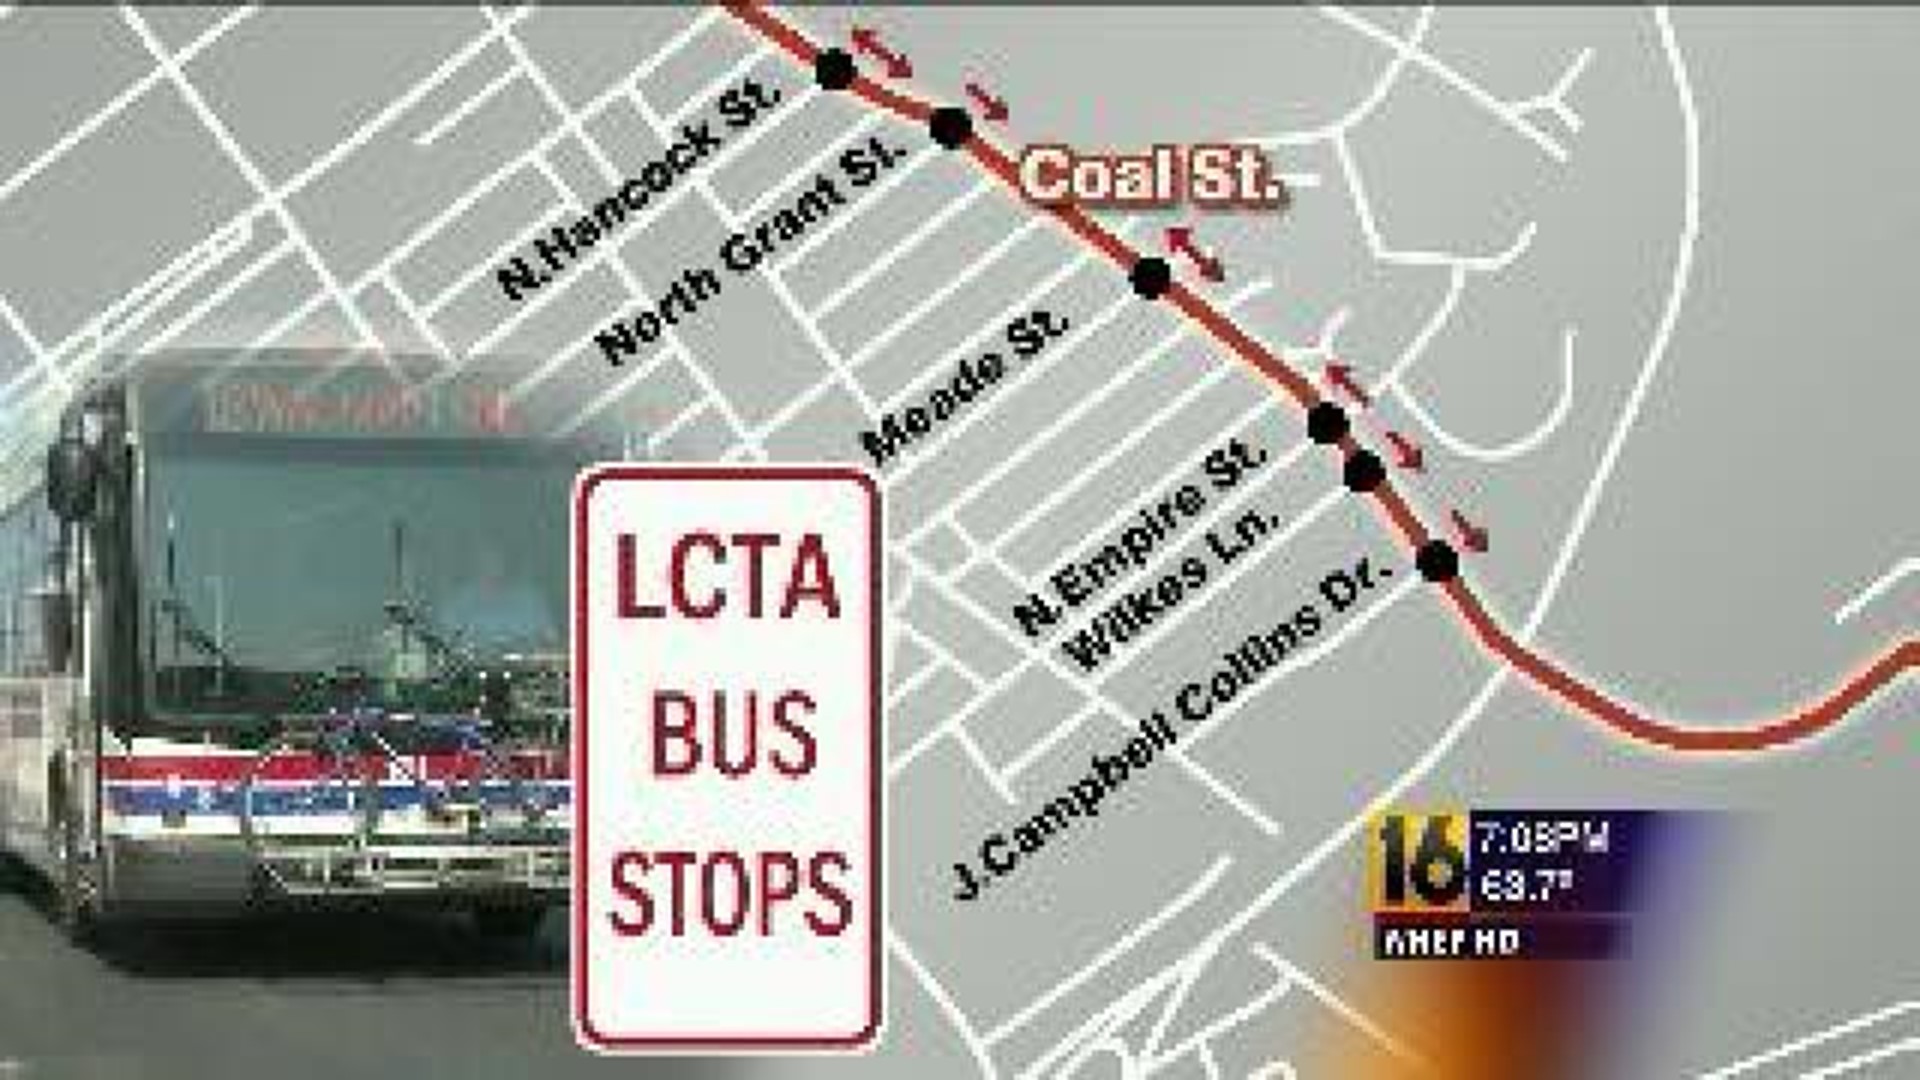 New Wilkes-Barre Bus Stops Confusing Riders